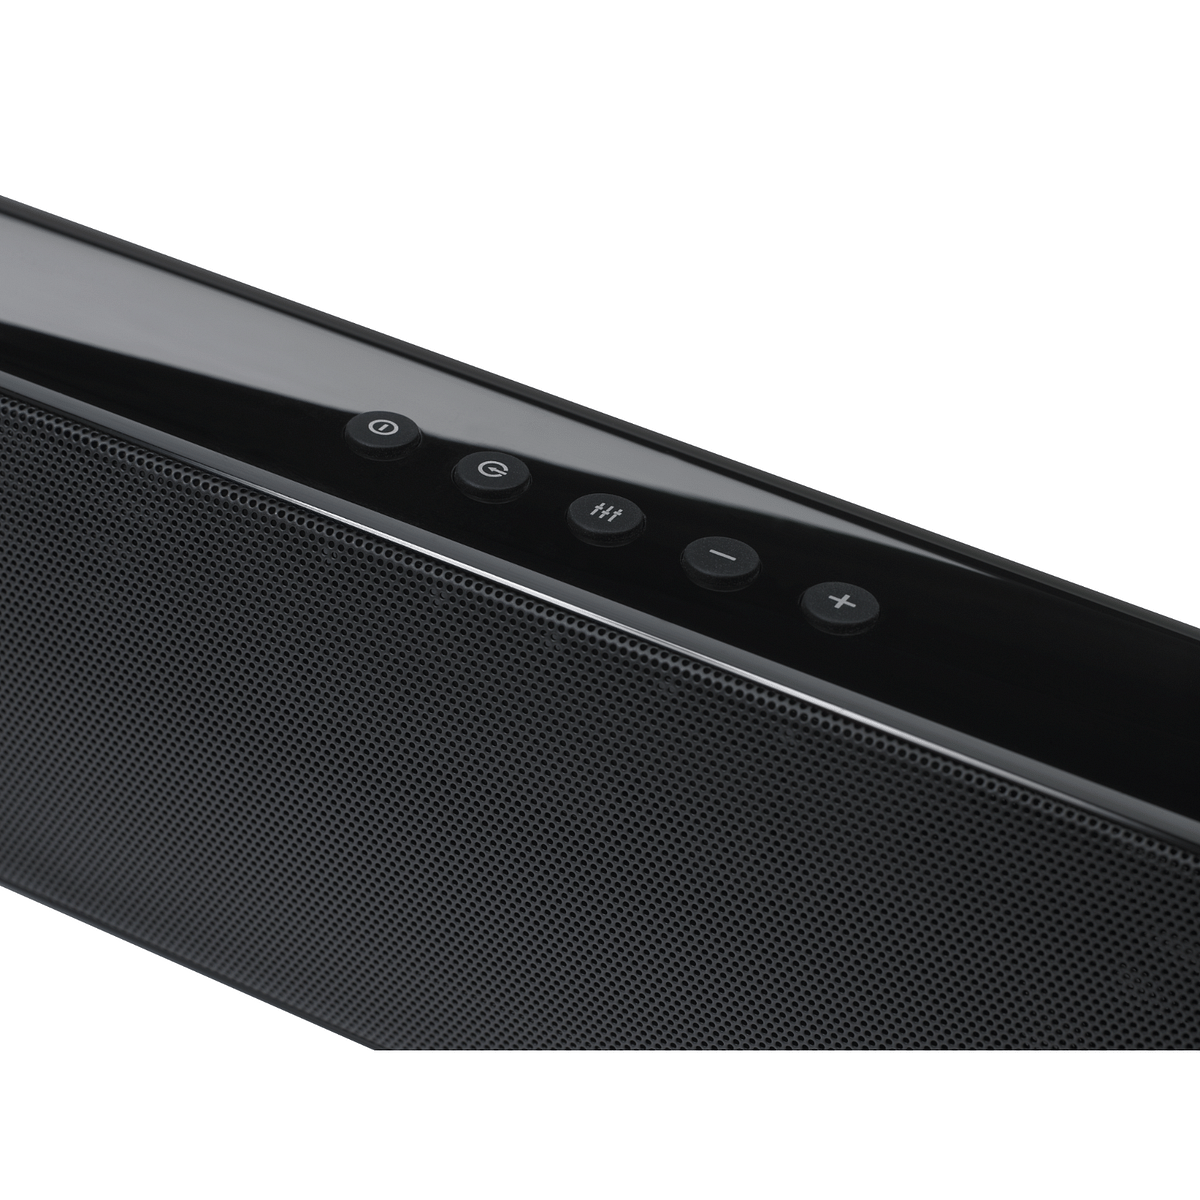 These two affordable soundbars have their pluses but feature wise, they are similar. So which one is worth buying?